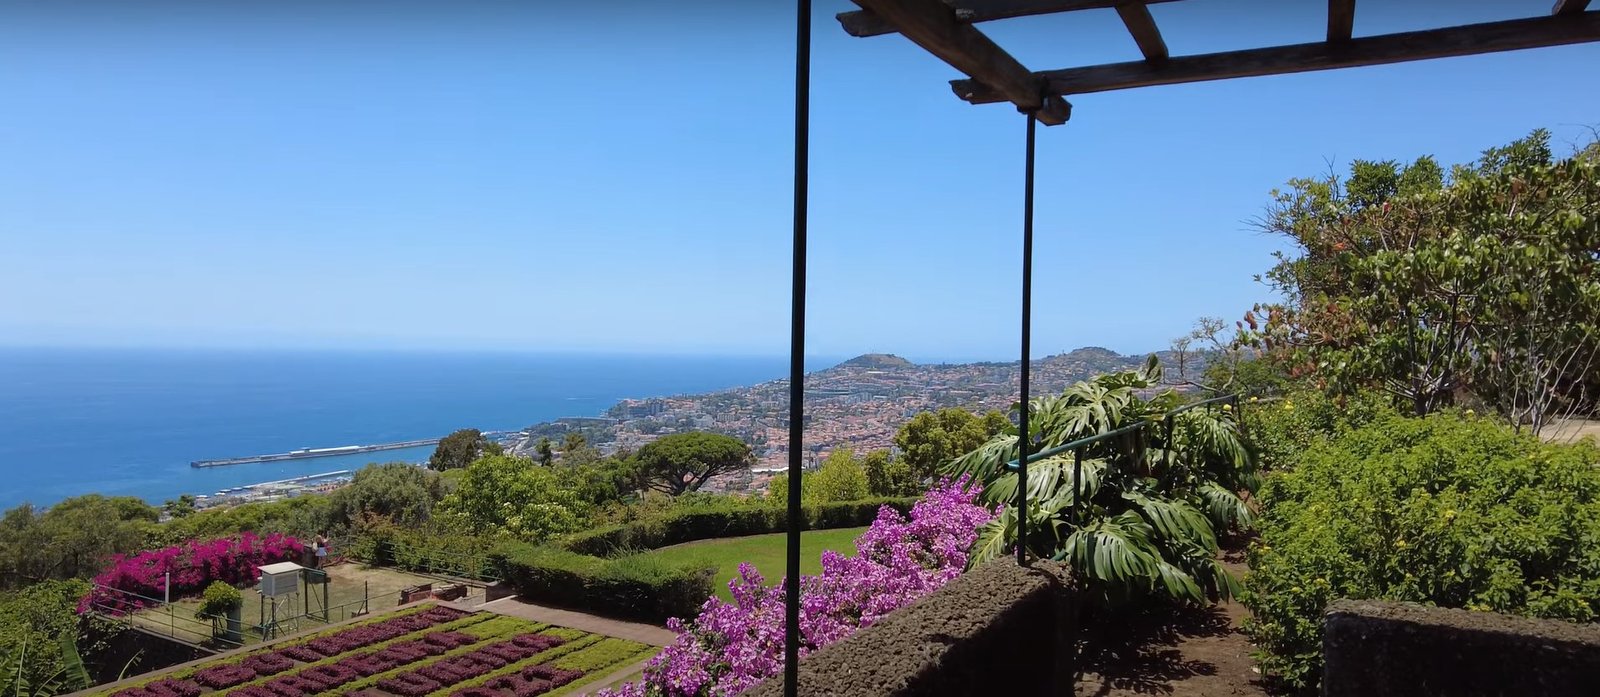 Video invites you to visit the Botanical Garden of Madeira